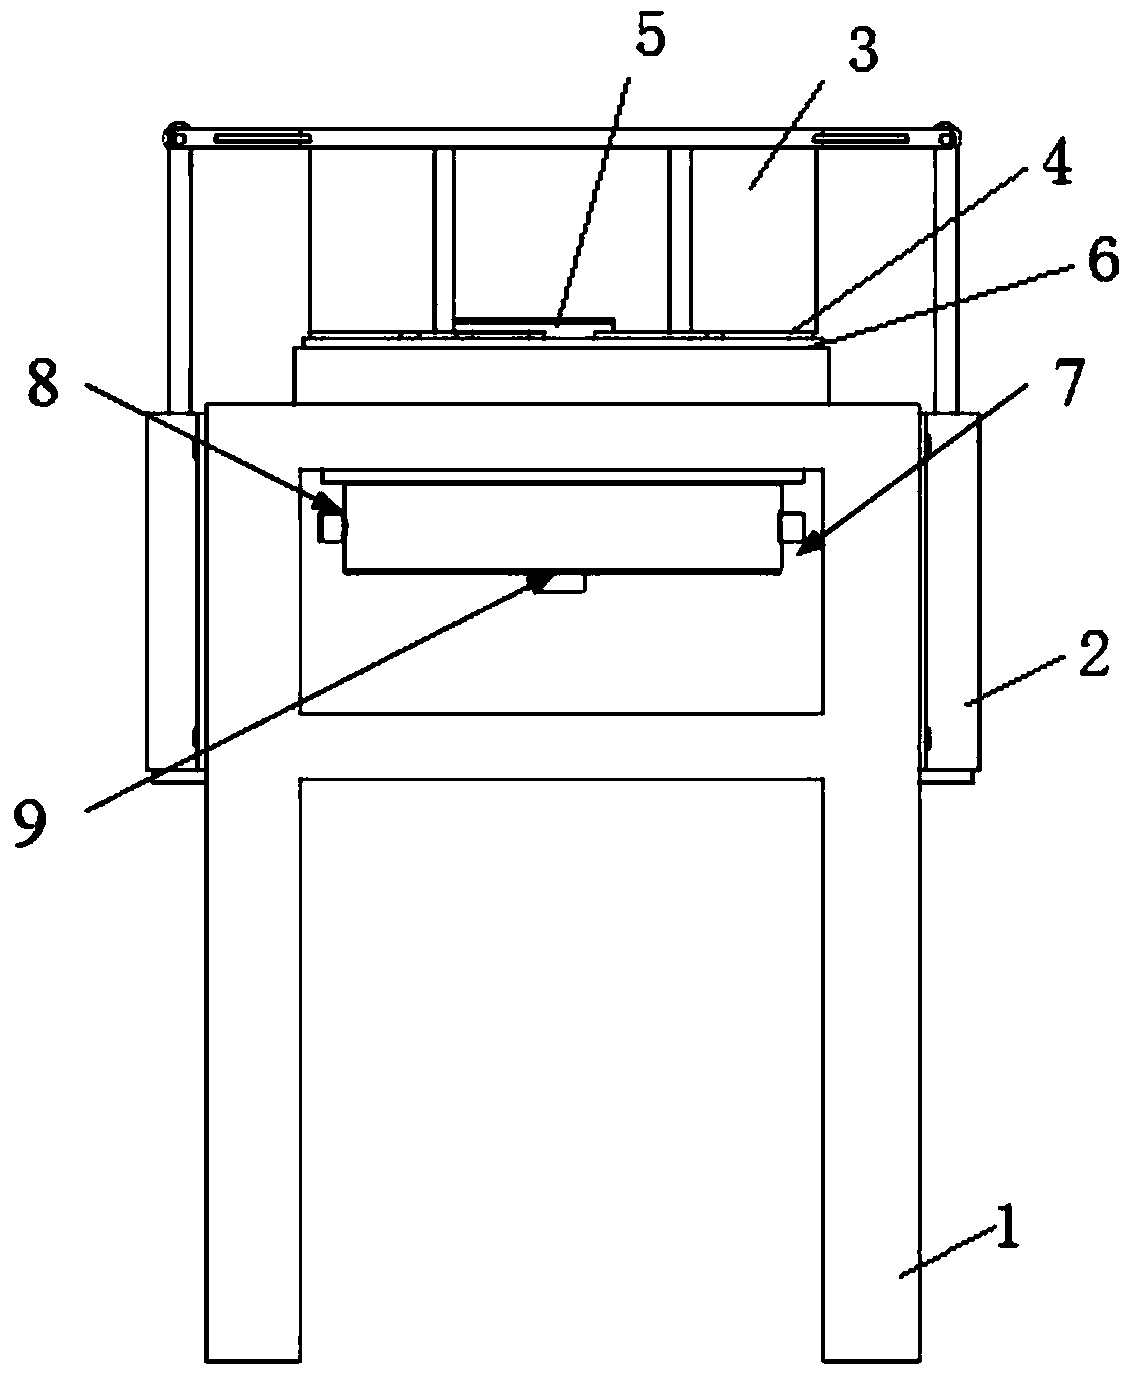 A manhole cover positive and negative pressure performance test bench and method